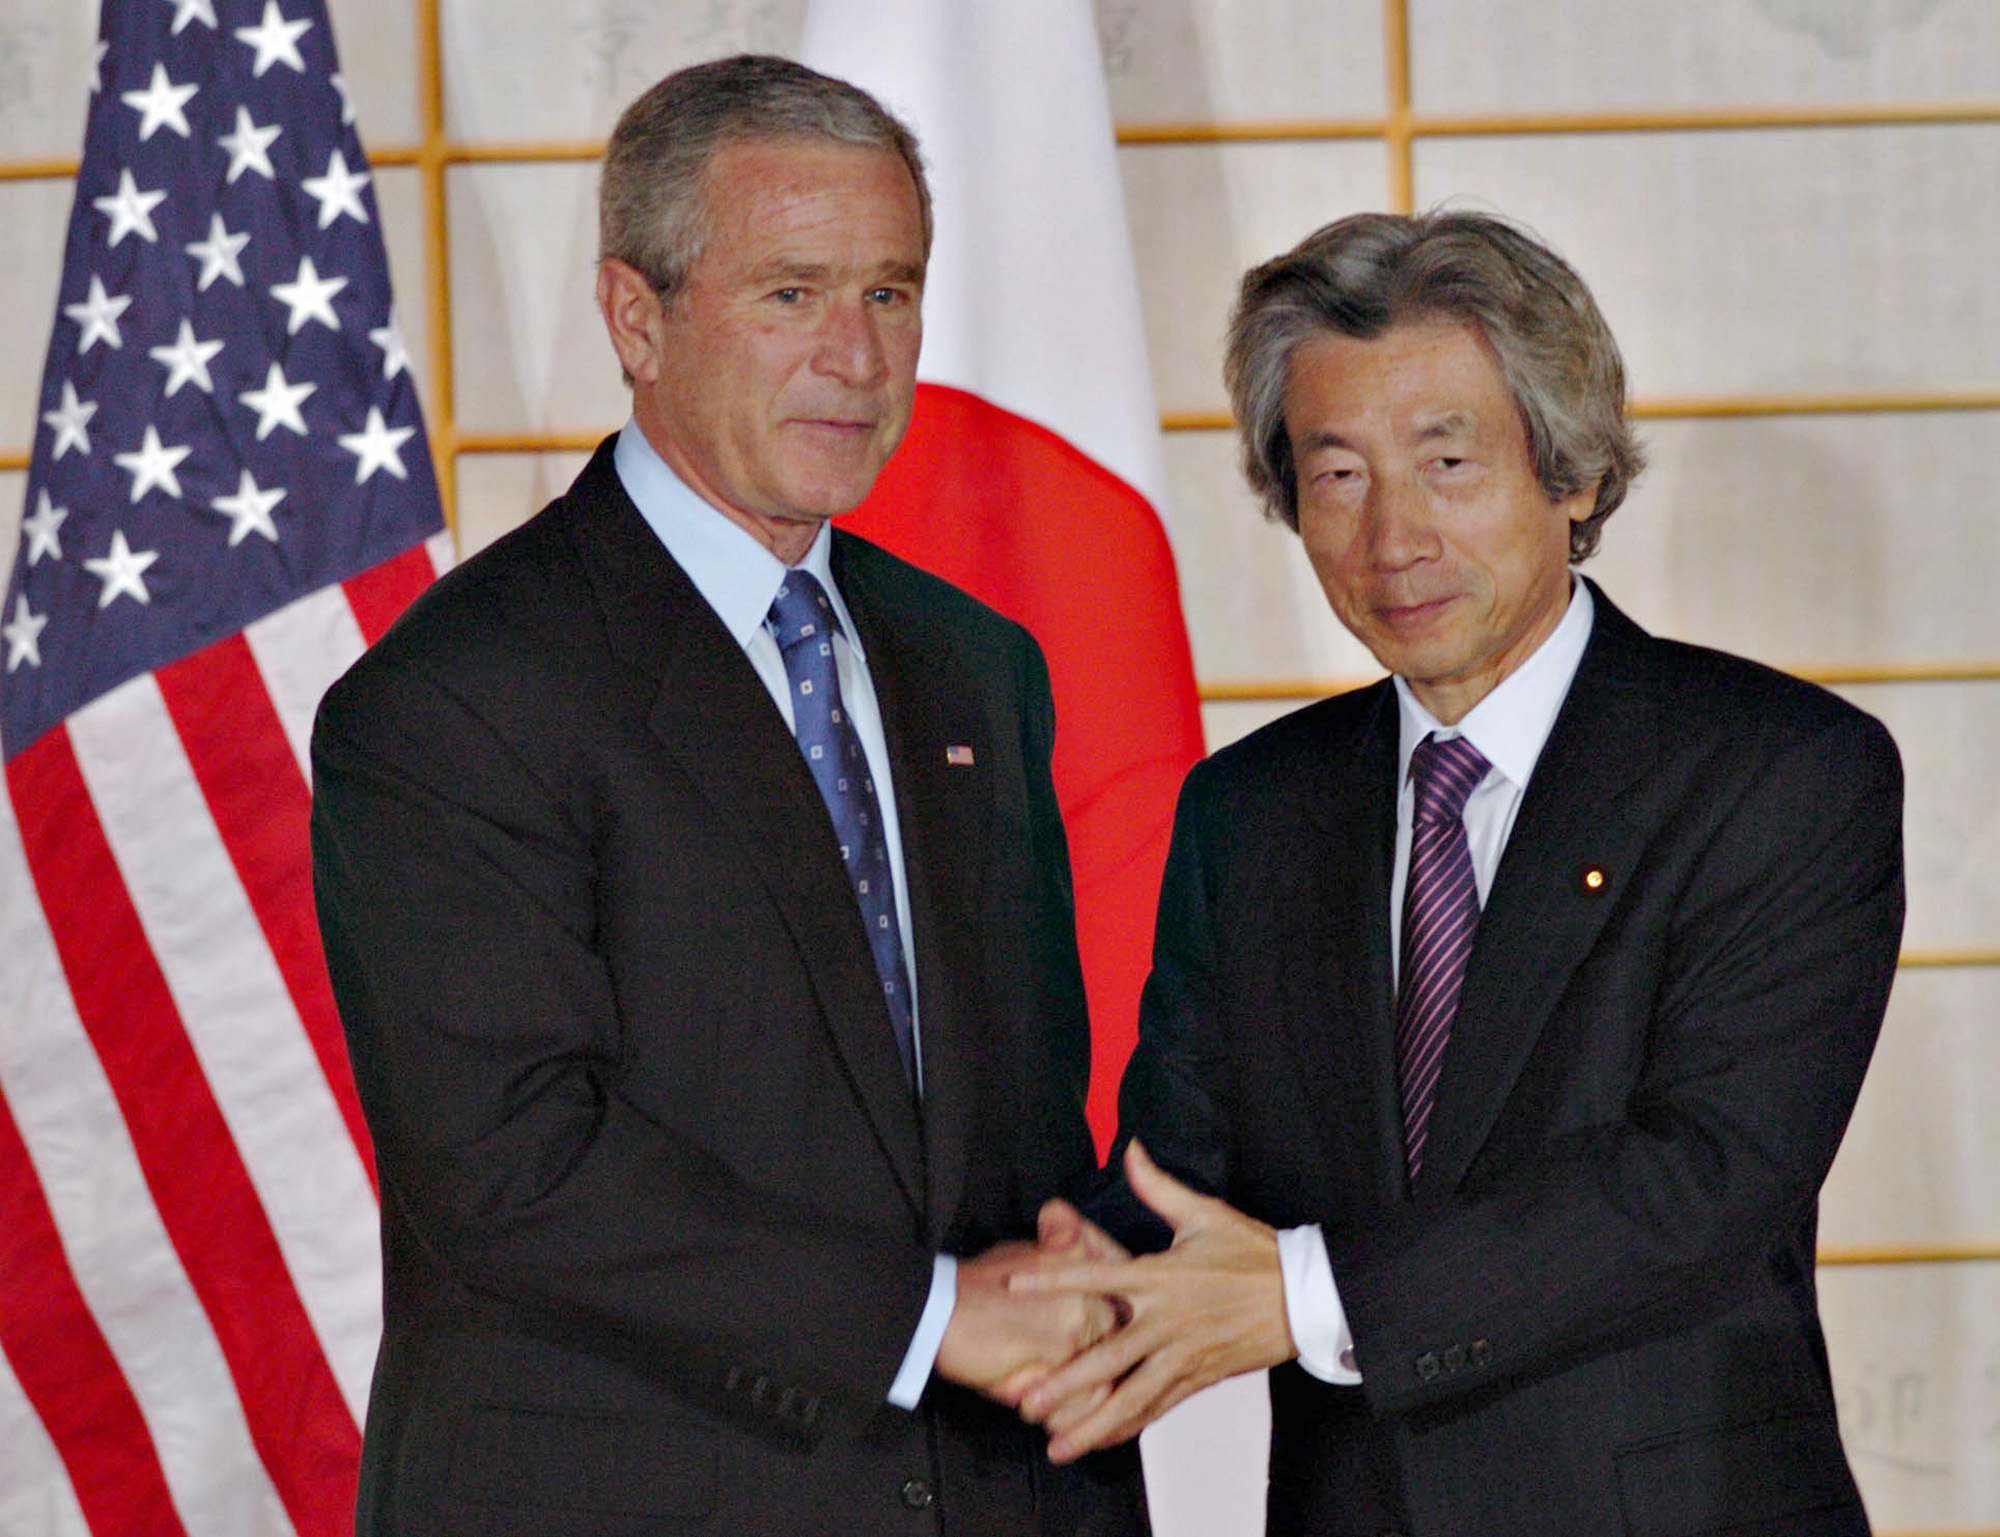 Old ways: Former U.S. President George W. Bush and Prime Minister Junichiro Koizumi meet in Kyoto in 2005. The two leaders' cooperation on the issue of the 'war on terror' led to some acts of protest in Japan. | BLOOMBERG NEWS